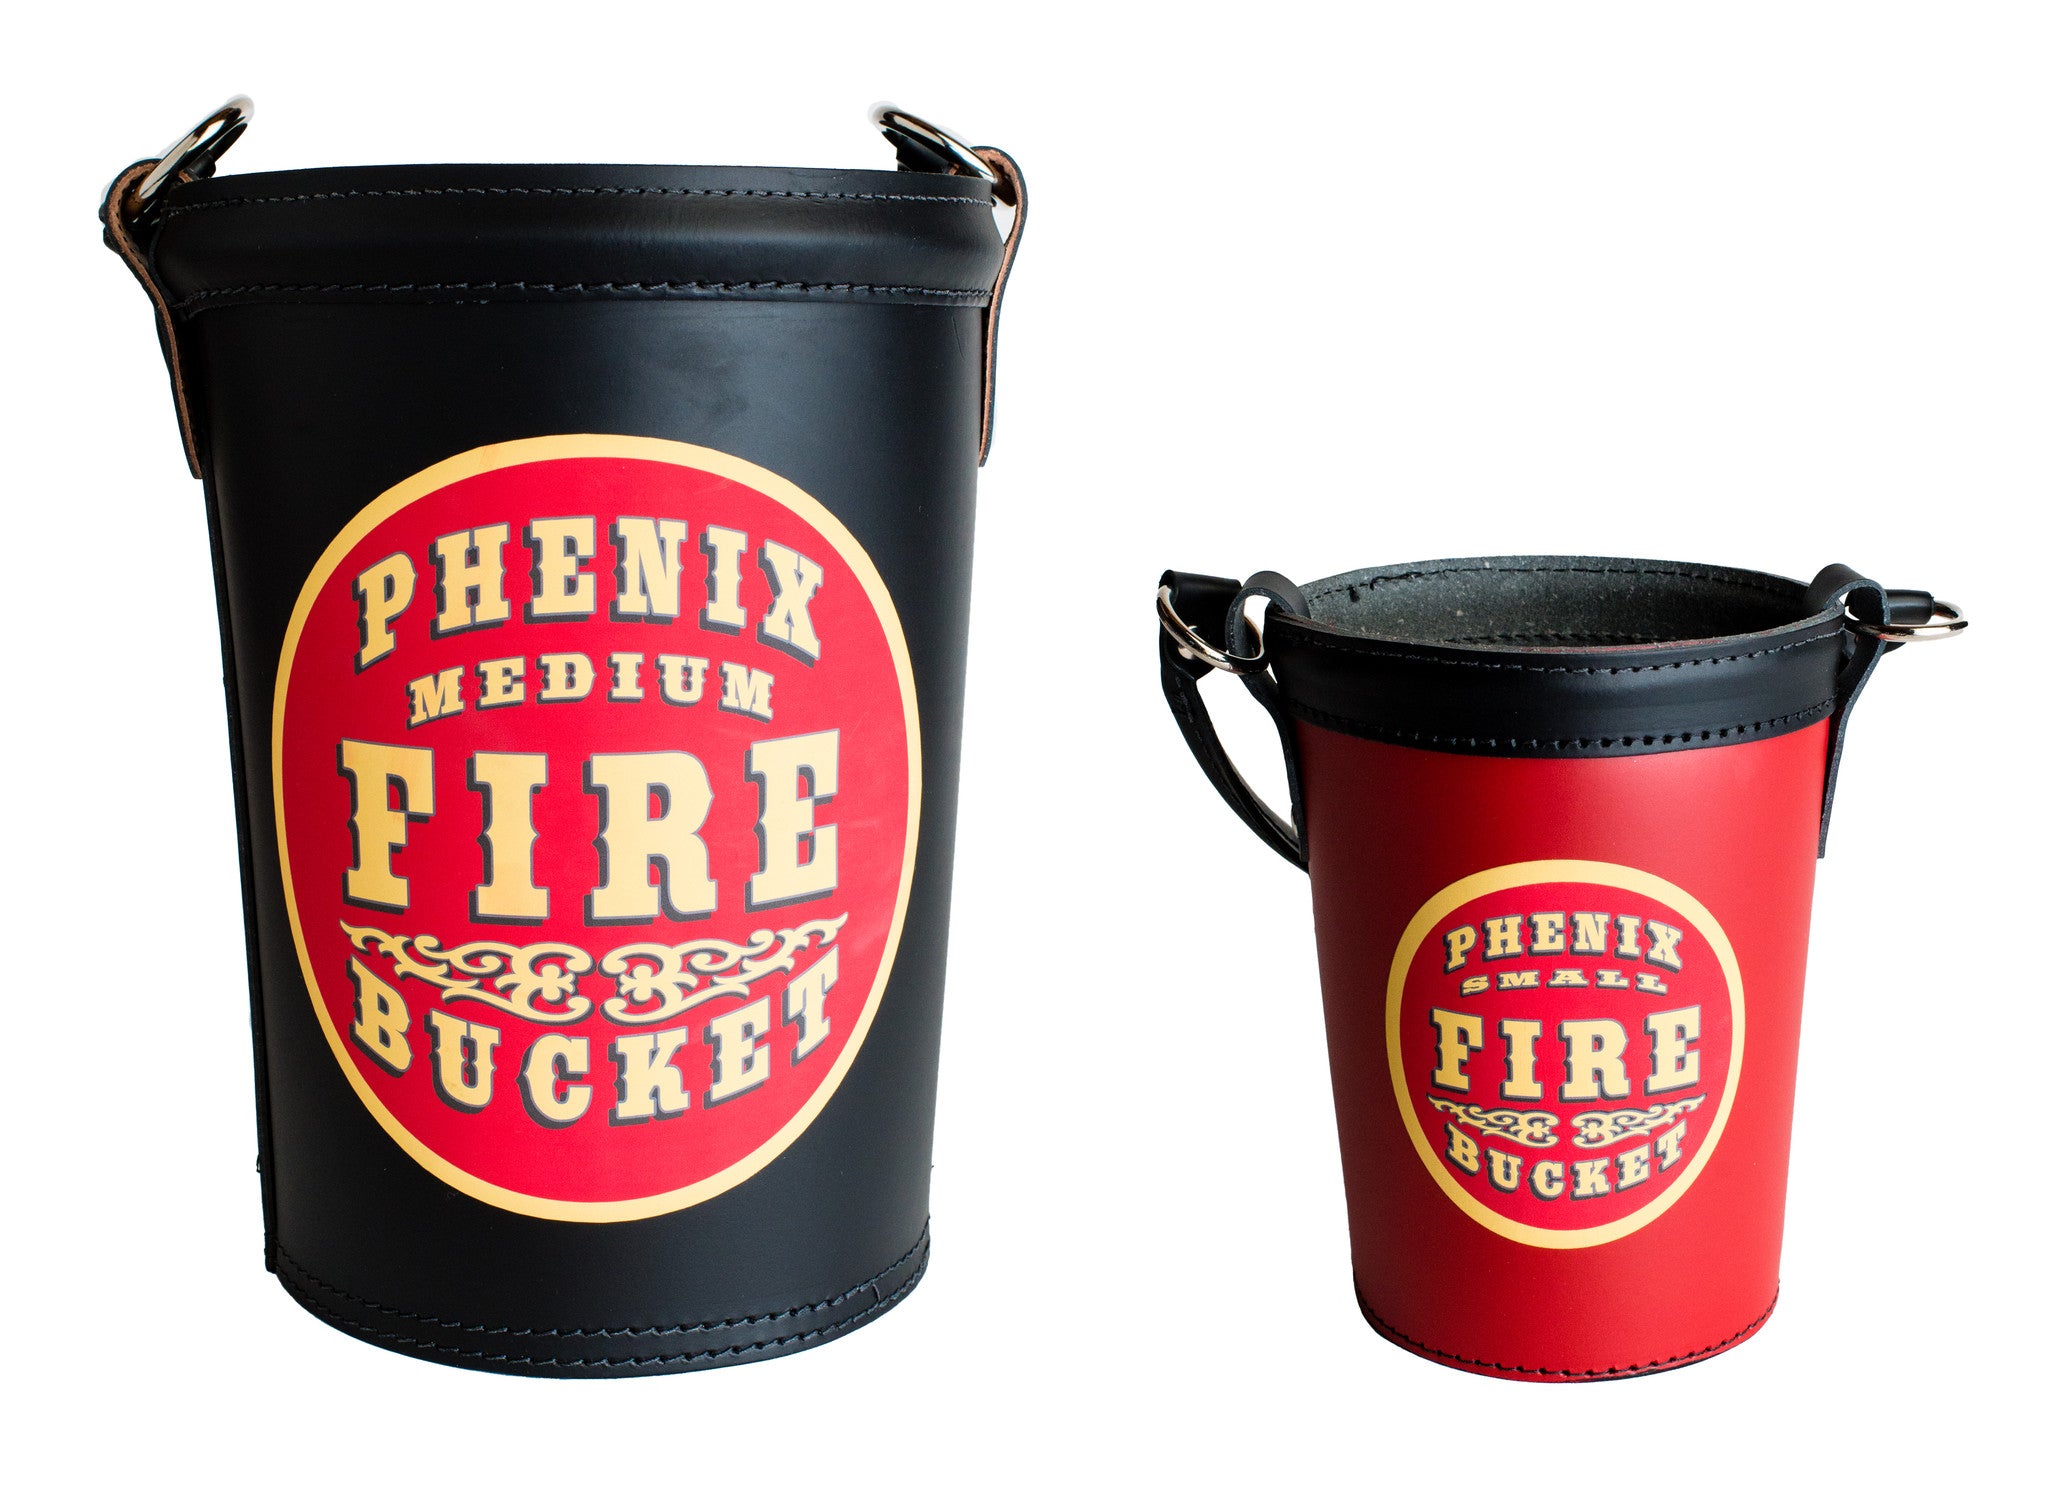 Collectible Leather Fire Buckets - Phenix Technology, Inc.